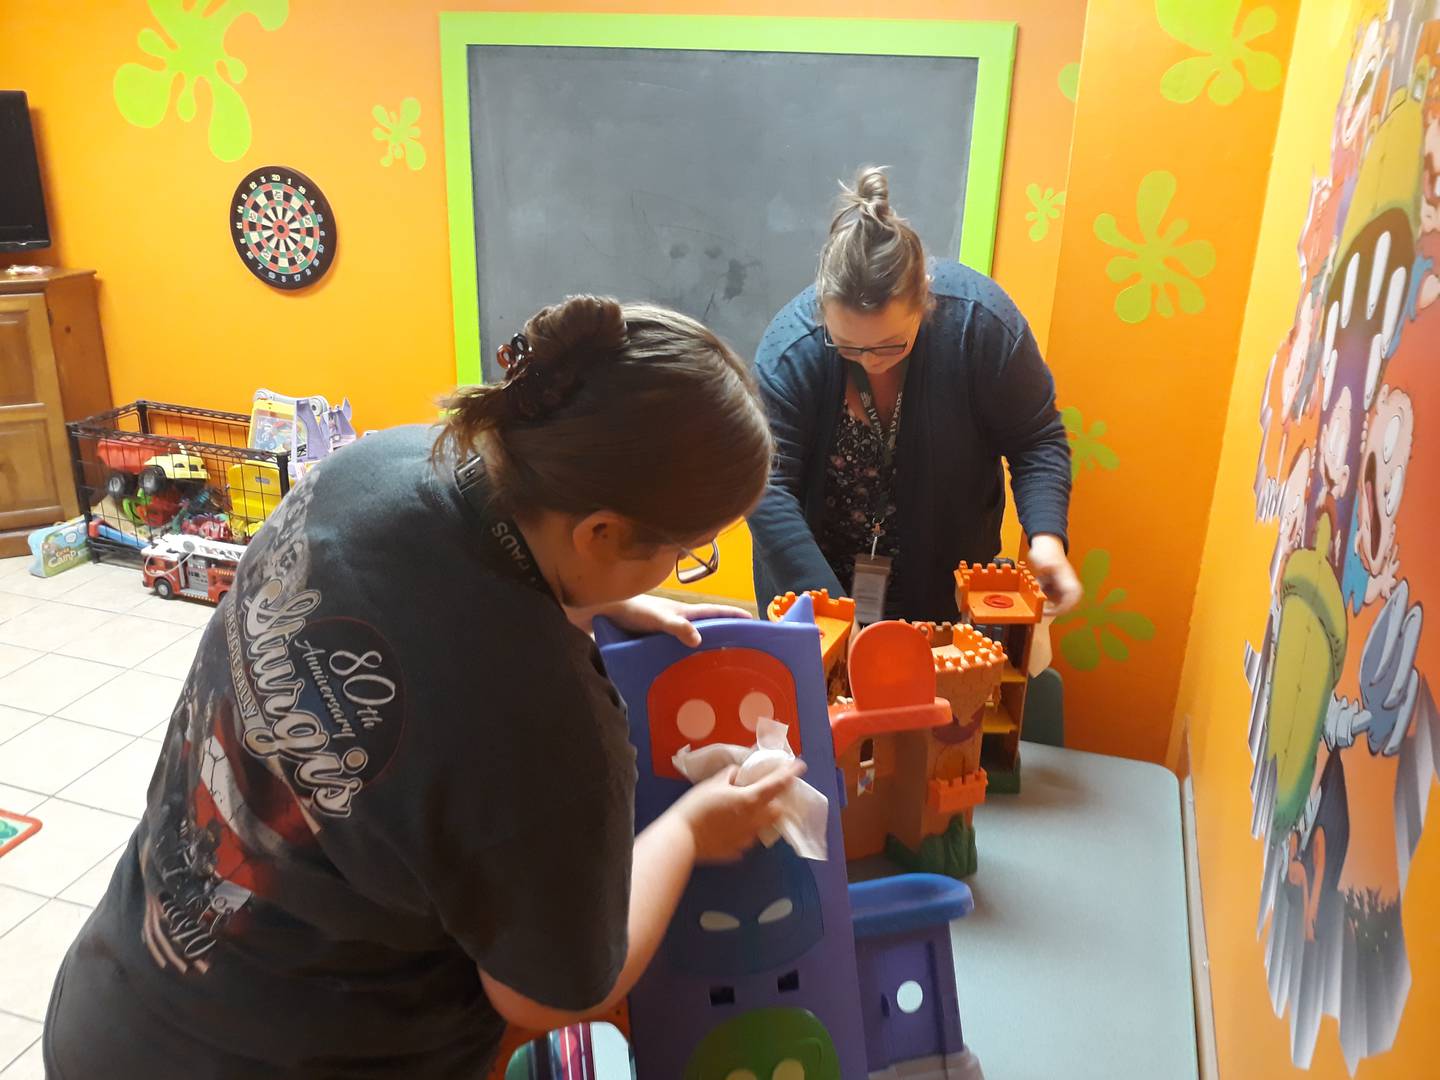 (Left to right) Brittany Smith, case manager at the Illinois Valley Public Action to Deliver Shelter, and Marissa Trumper, program director at PADS, wipe down toys with sanitary wipes in preparation for the Ottawa shelter's opening Monday, Aug. 15, 2022.